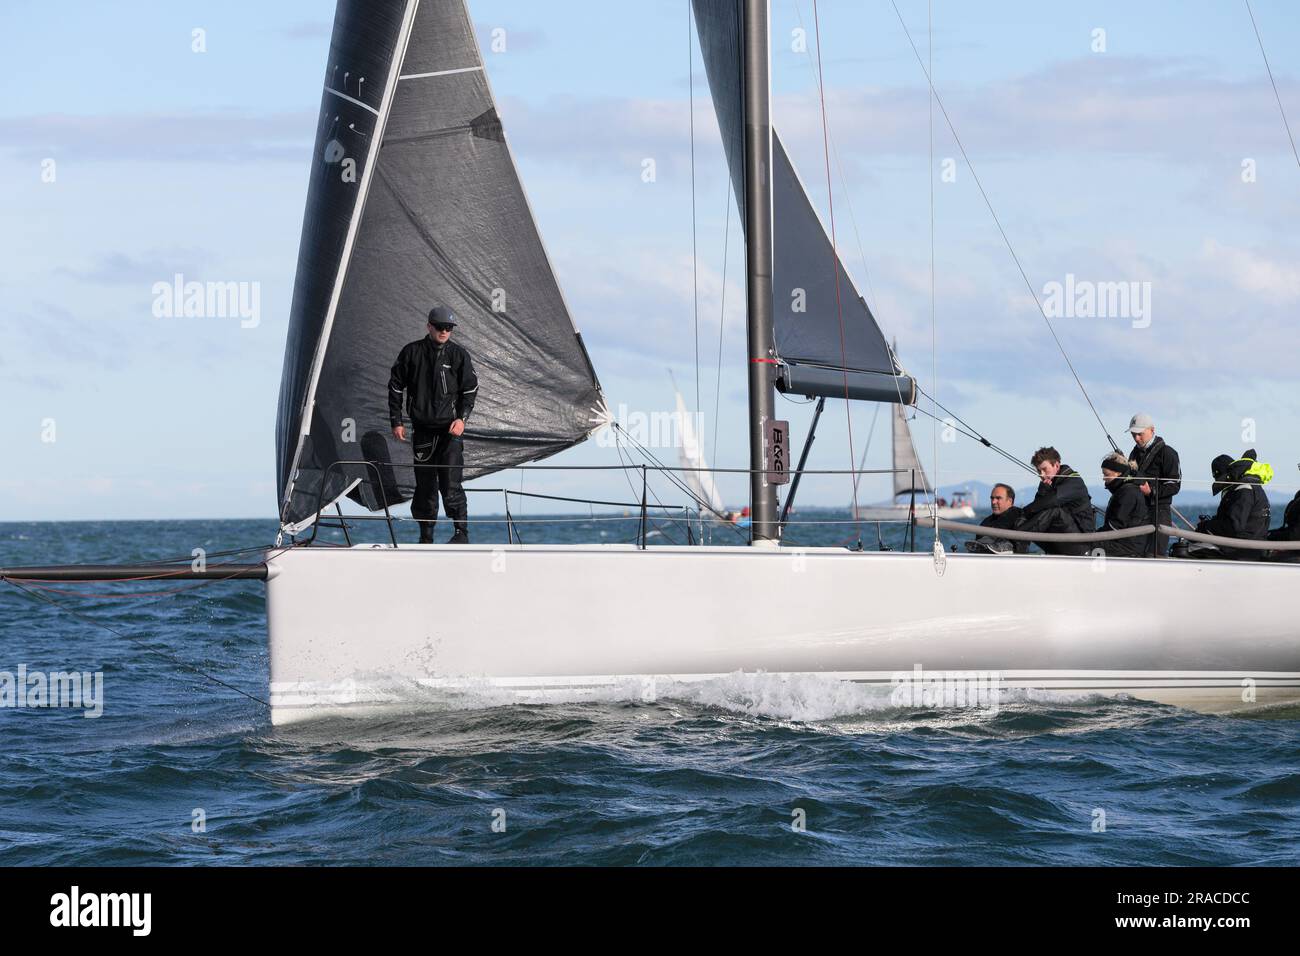 Large yachts are seen competing in Race 1 of the Winter Series held in choppy seas in Port Phillip Bay, Melbourne, Australia Stock Photo